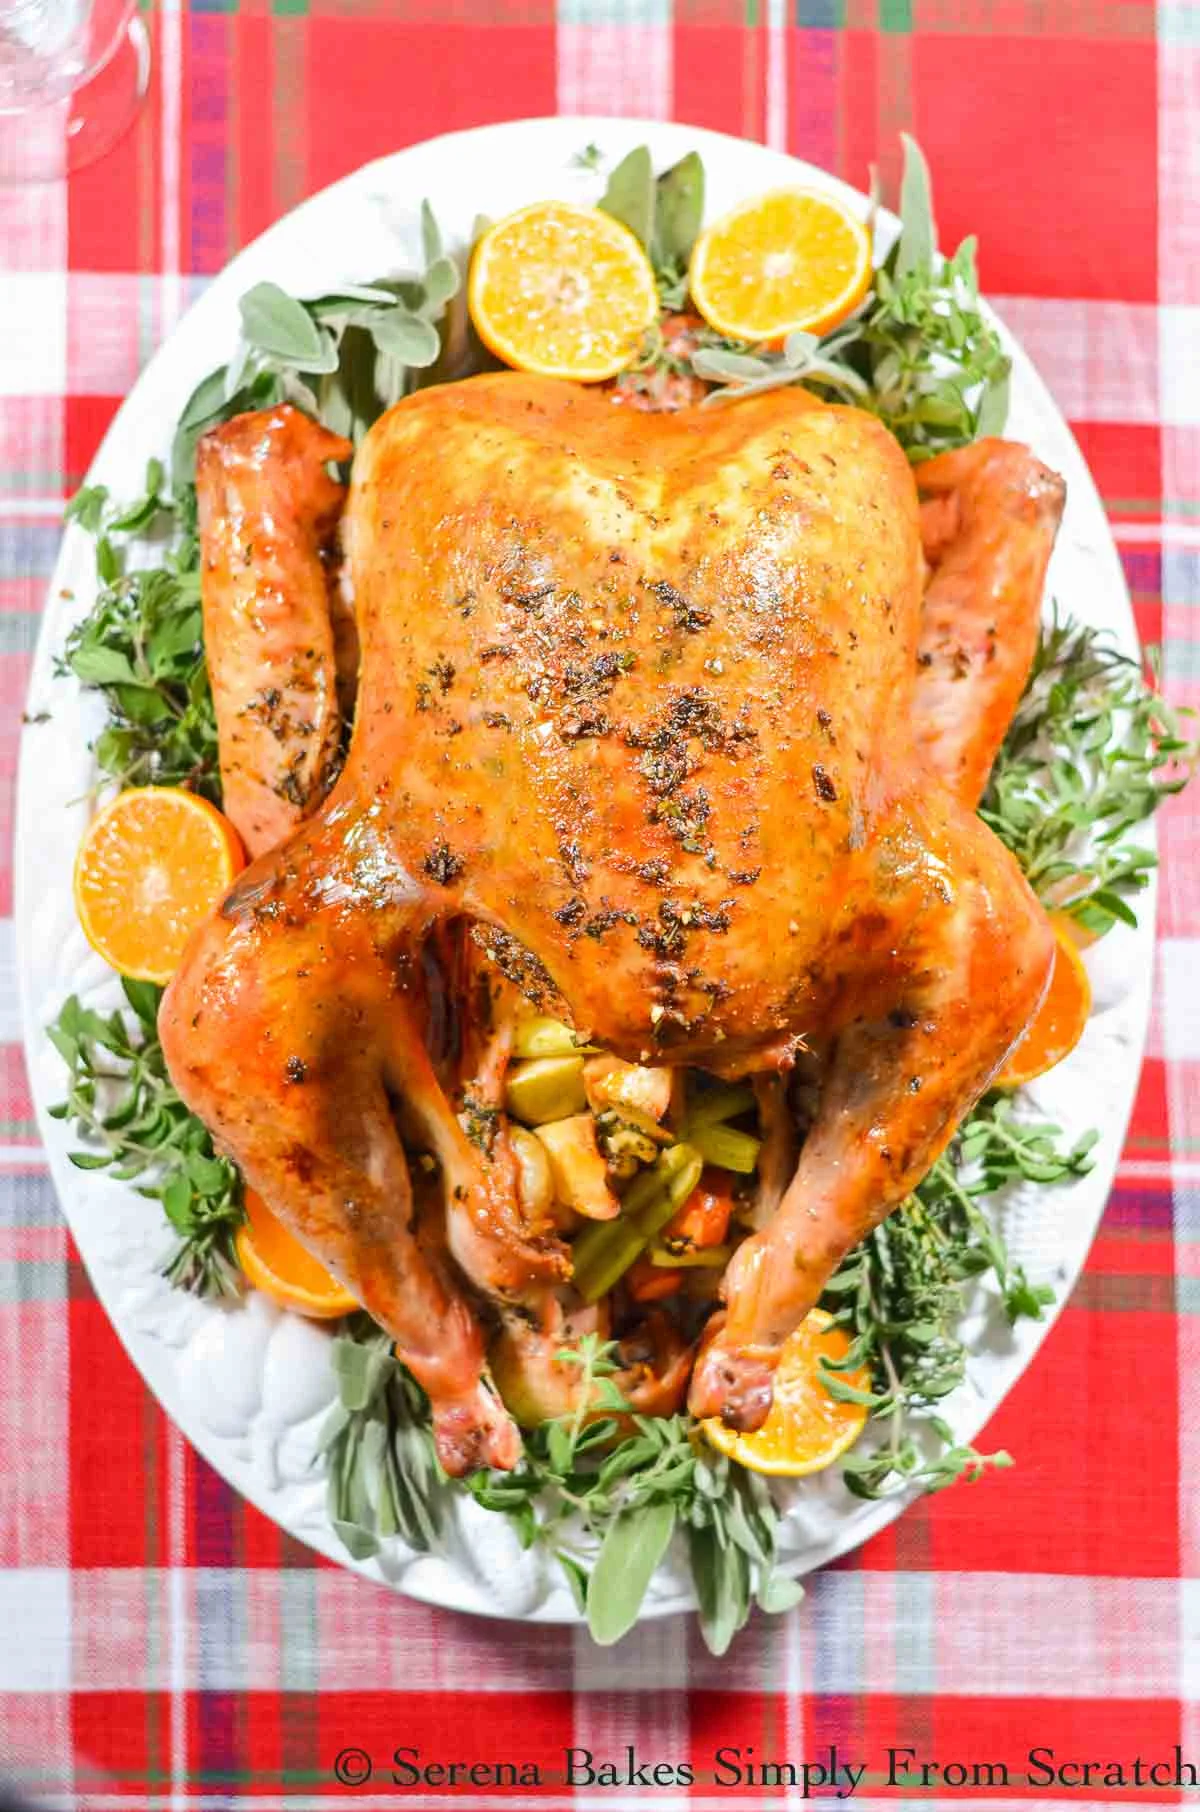 Golden Brown Cajun Roasted Cheesecloth Turkey on a white serving platter garnished with fresh herbs and sliced oranges on a red plaid table cloth.